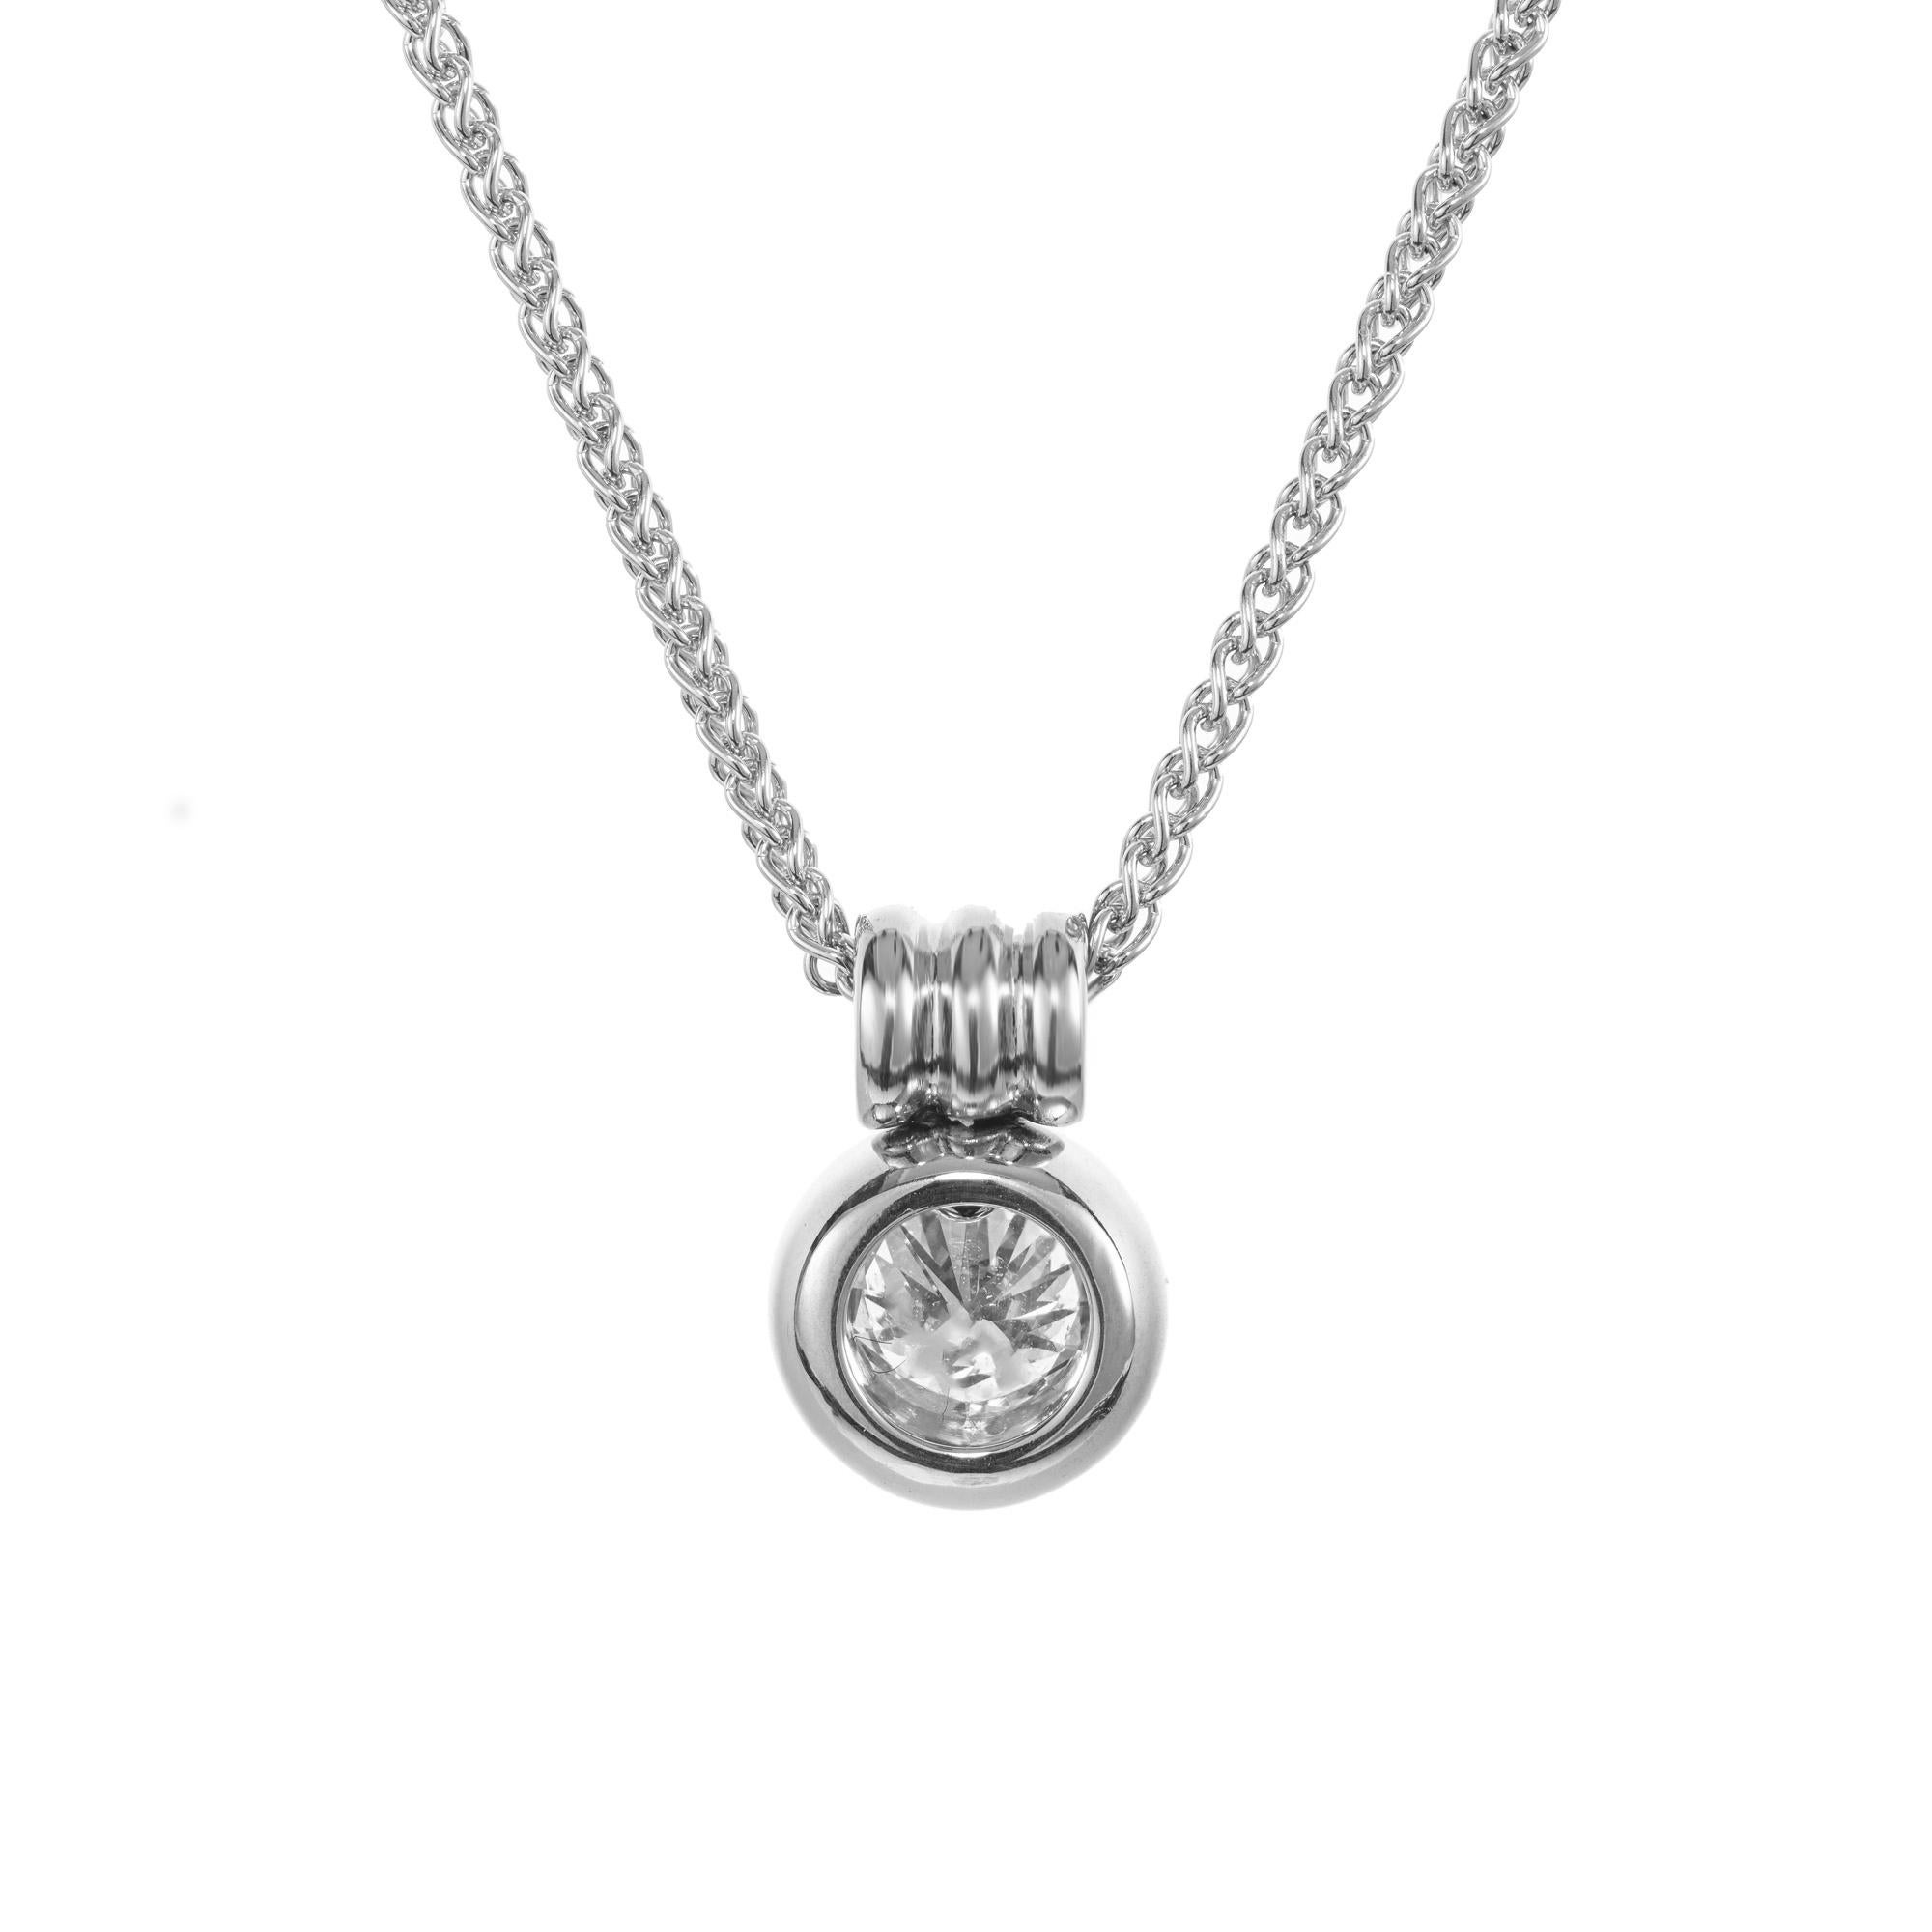 Women's EGL Certified 1.23 Carat Round Diamond White Gold Pendant Necklace For Sale